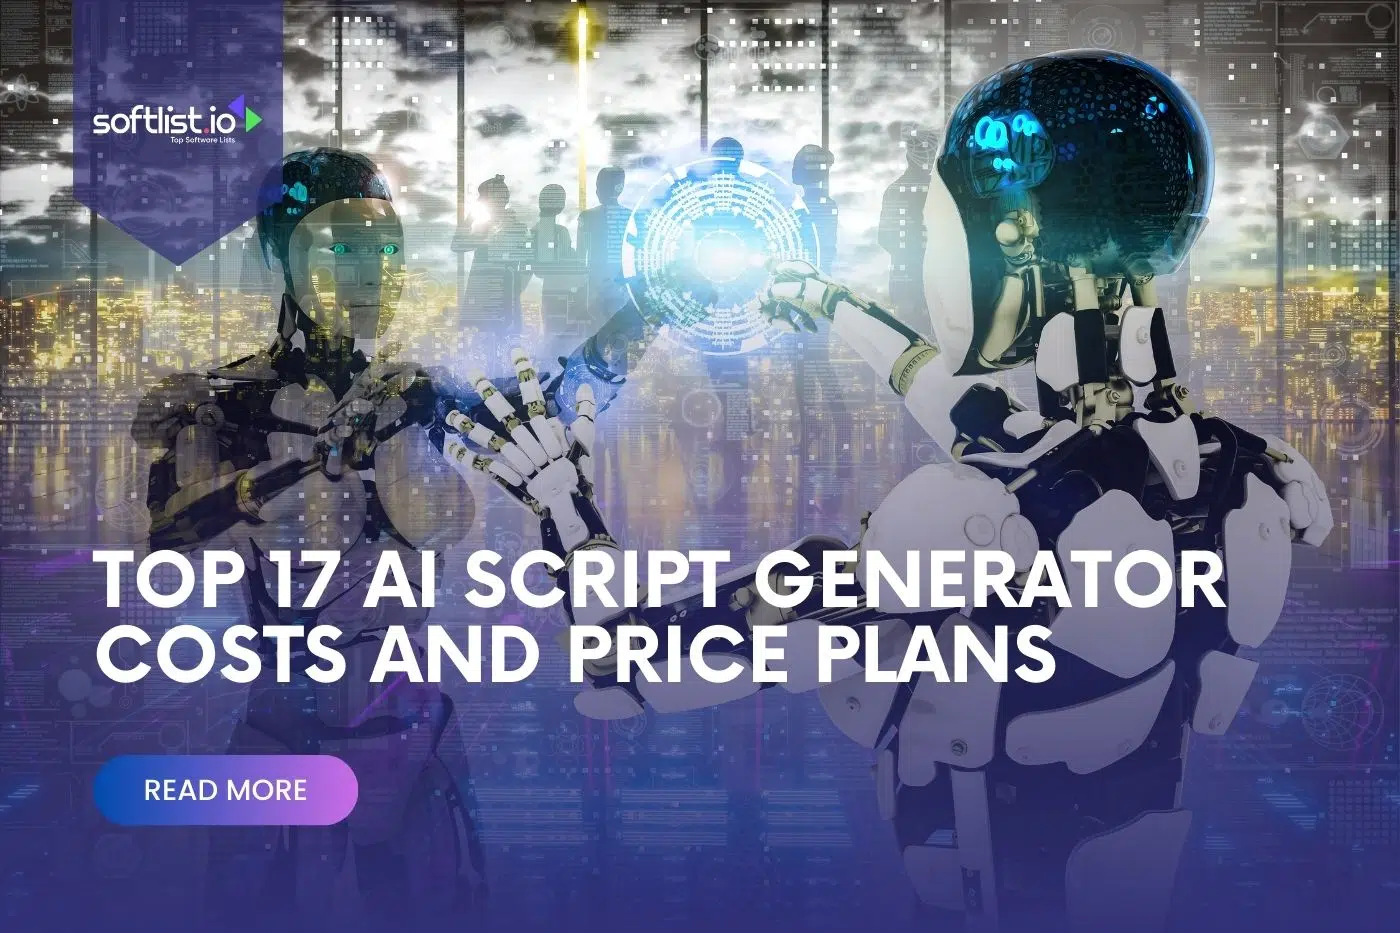 Top 17 AI Script Generator Costs and Price Plans